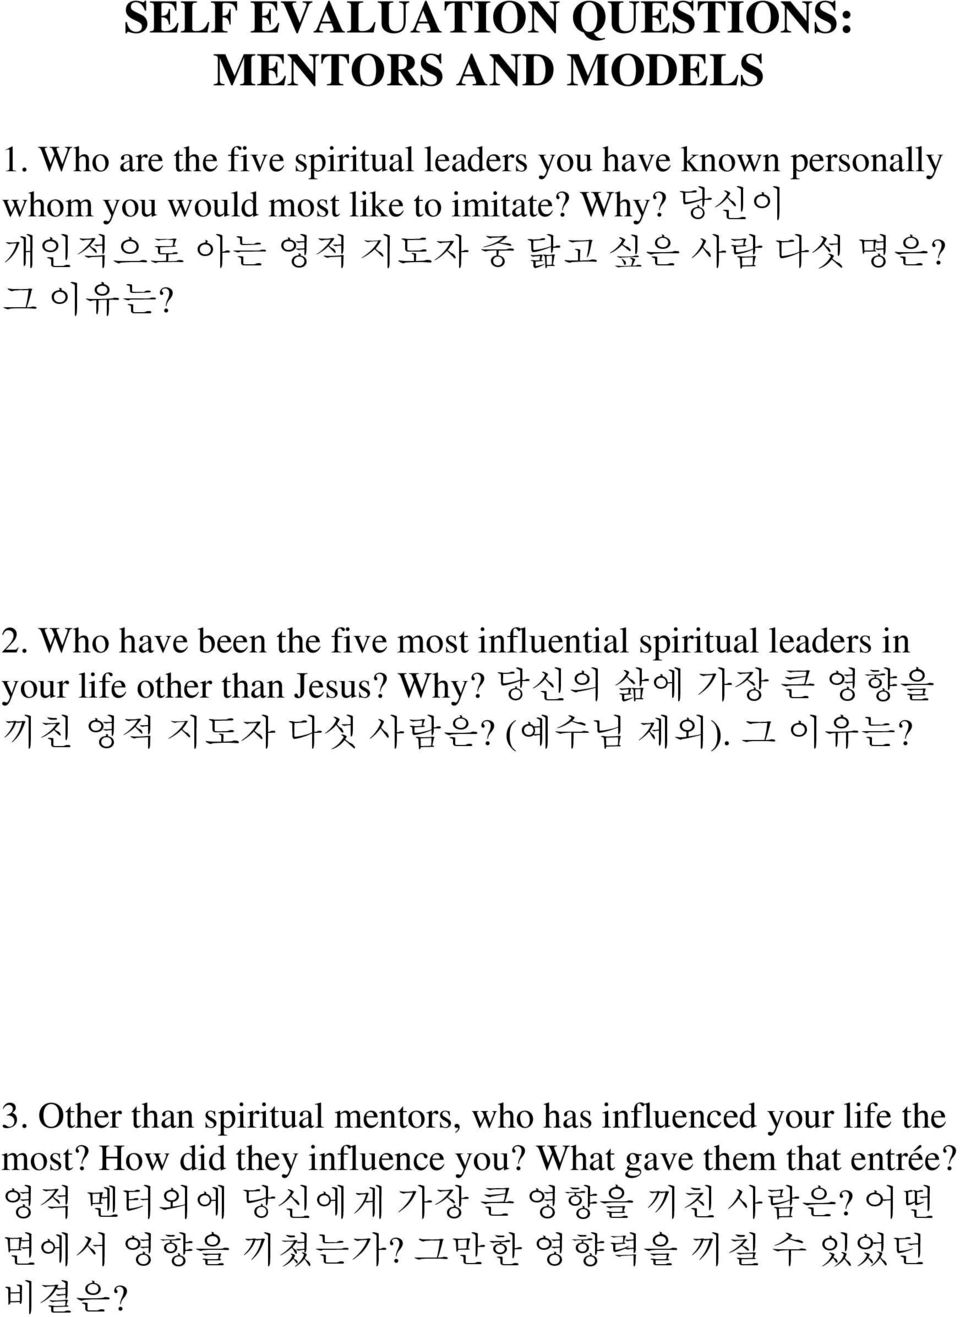 Who have been the five most influential spiritual leaders in your life other than Jesus? Why? 당신의 삶에 가장 큰 영향을 끼친 영적 지도자 다섯 사람은?